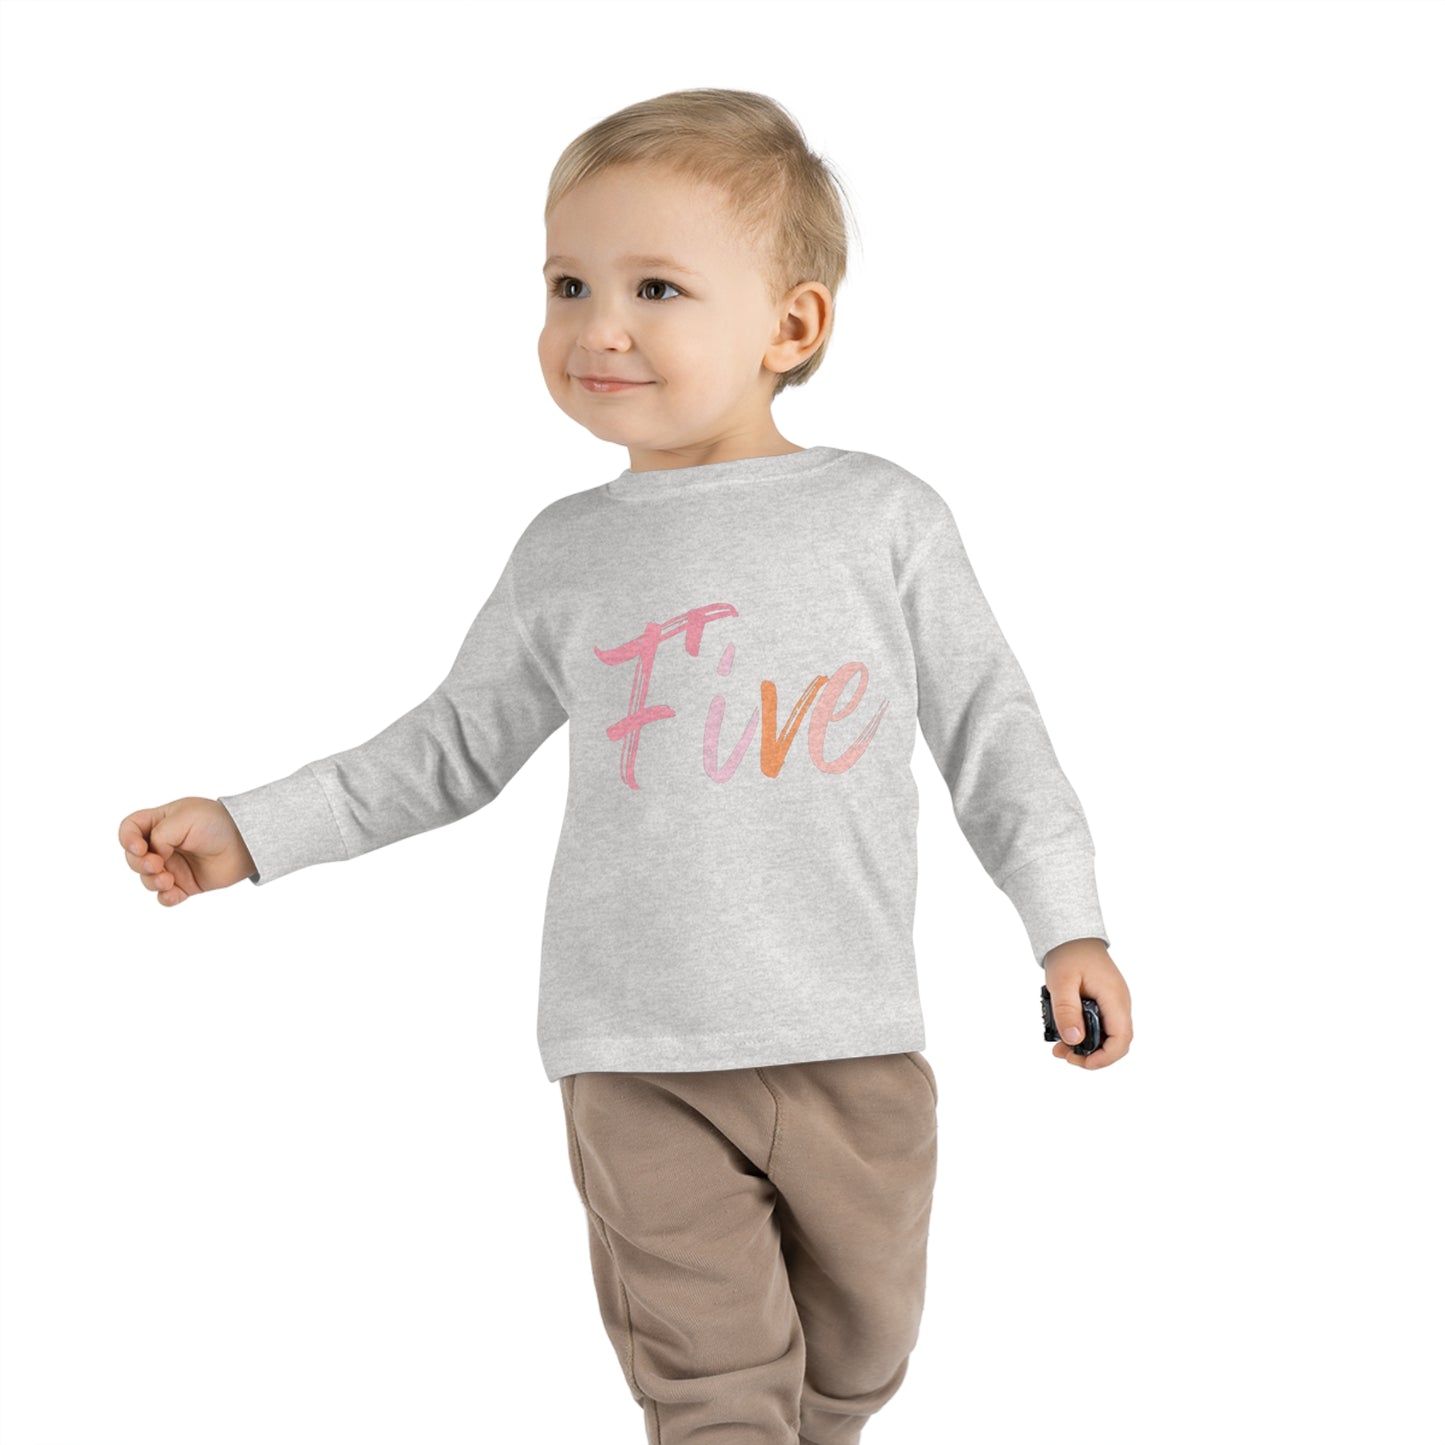 Long Sleeve Age Tee Shirt For 5 Year Old Unisex Kids